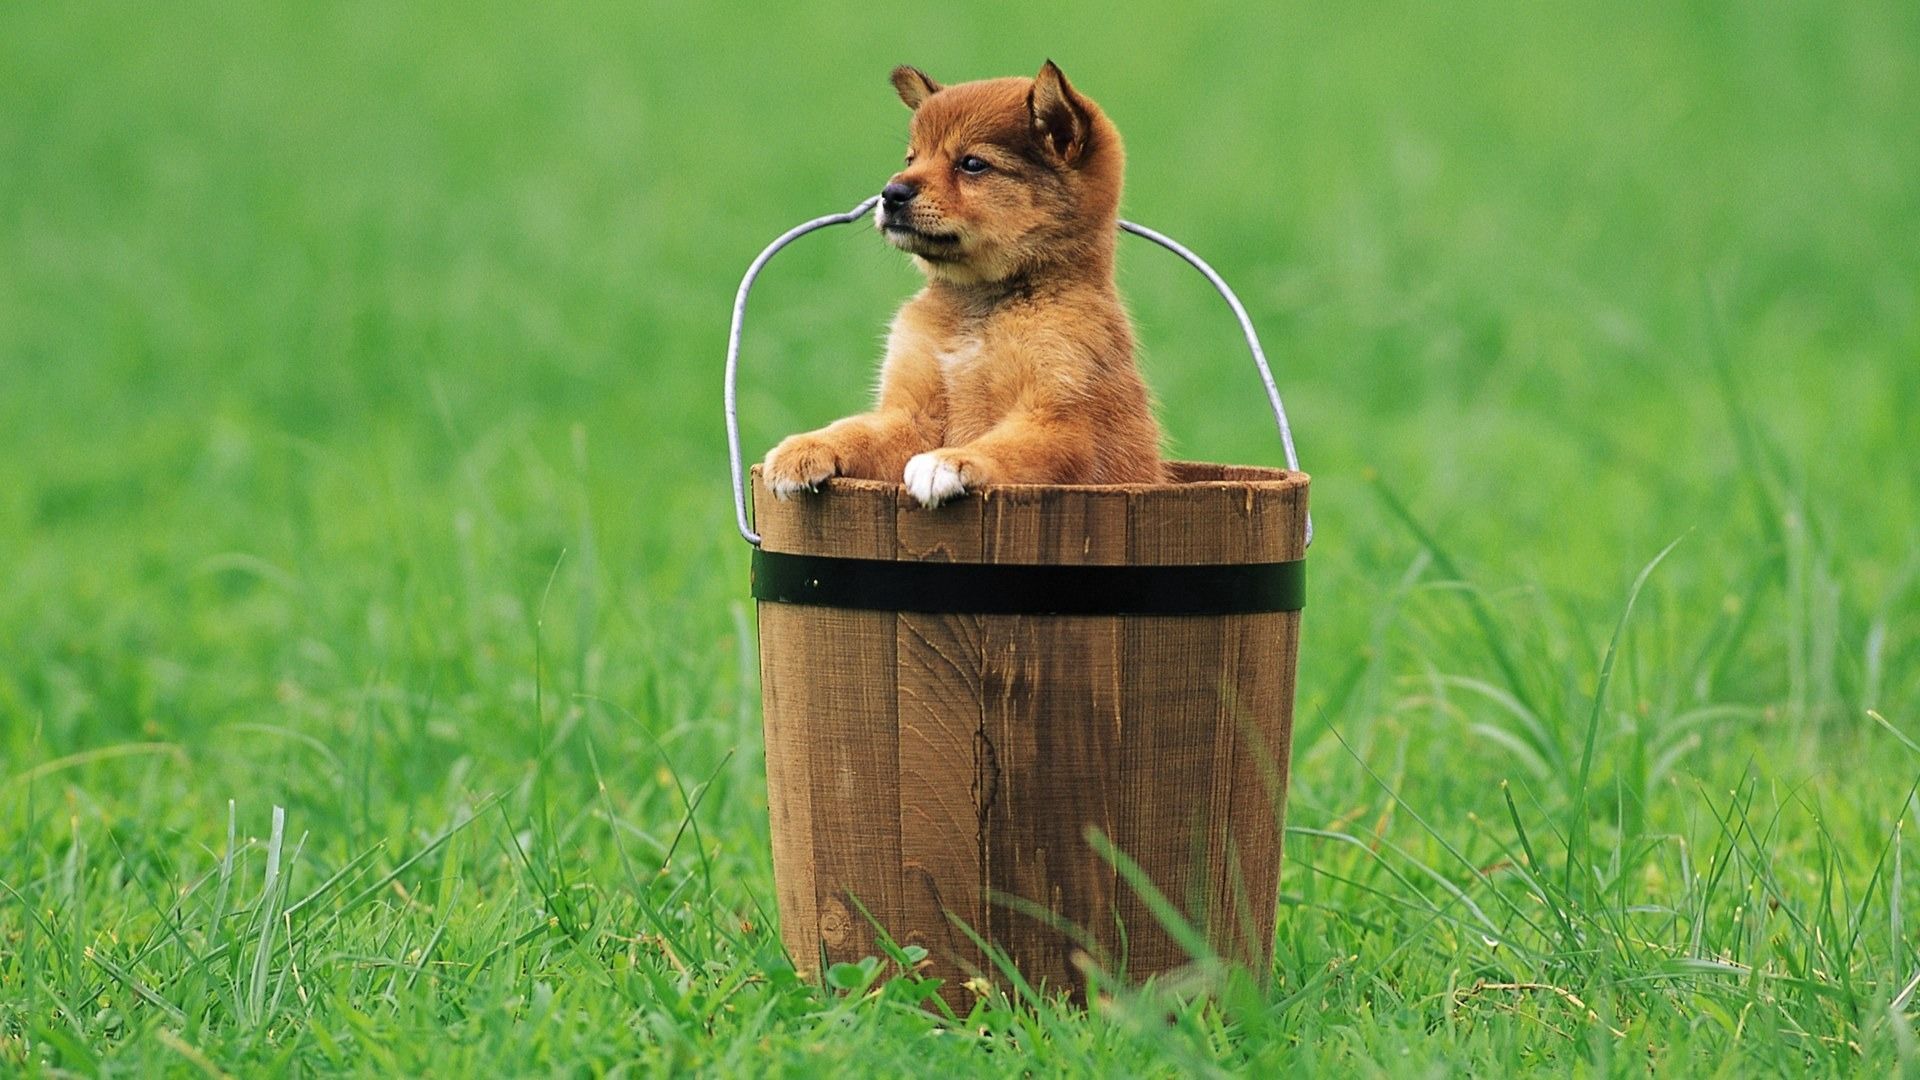 wallpapers animals, grass, sit, puppy, expectation, waiting, bucket